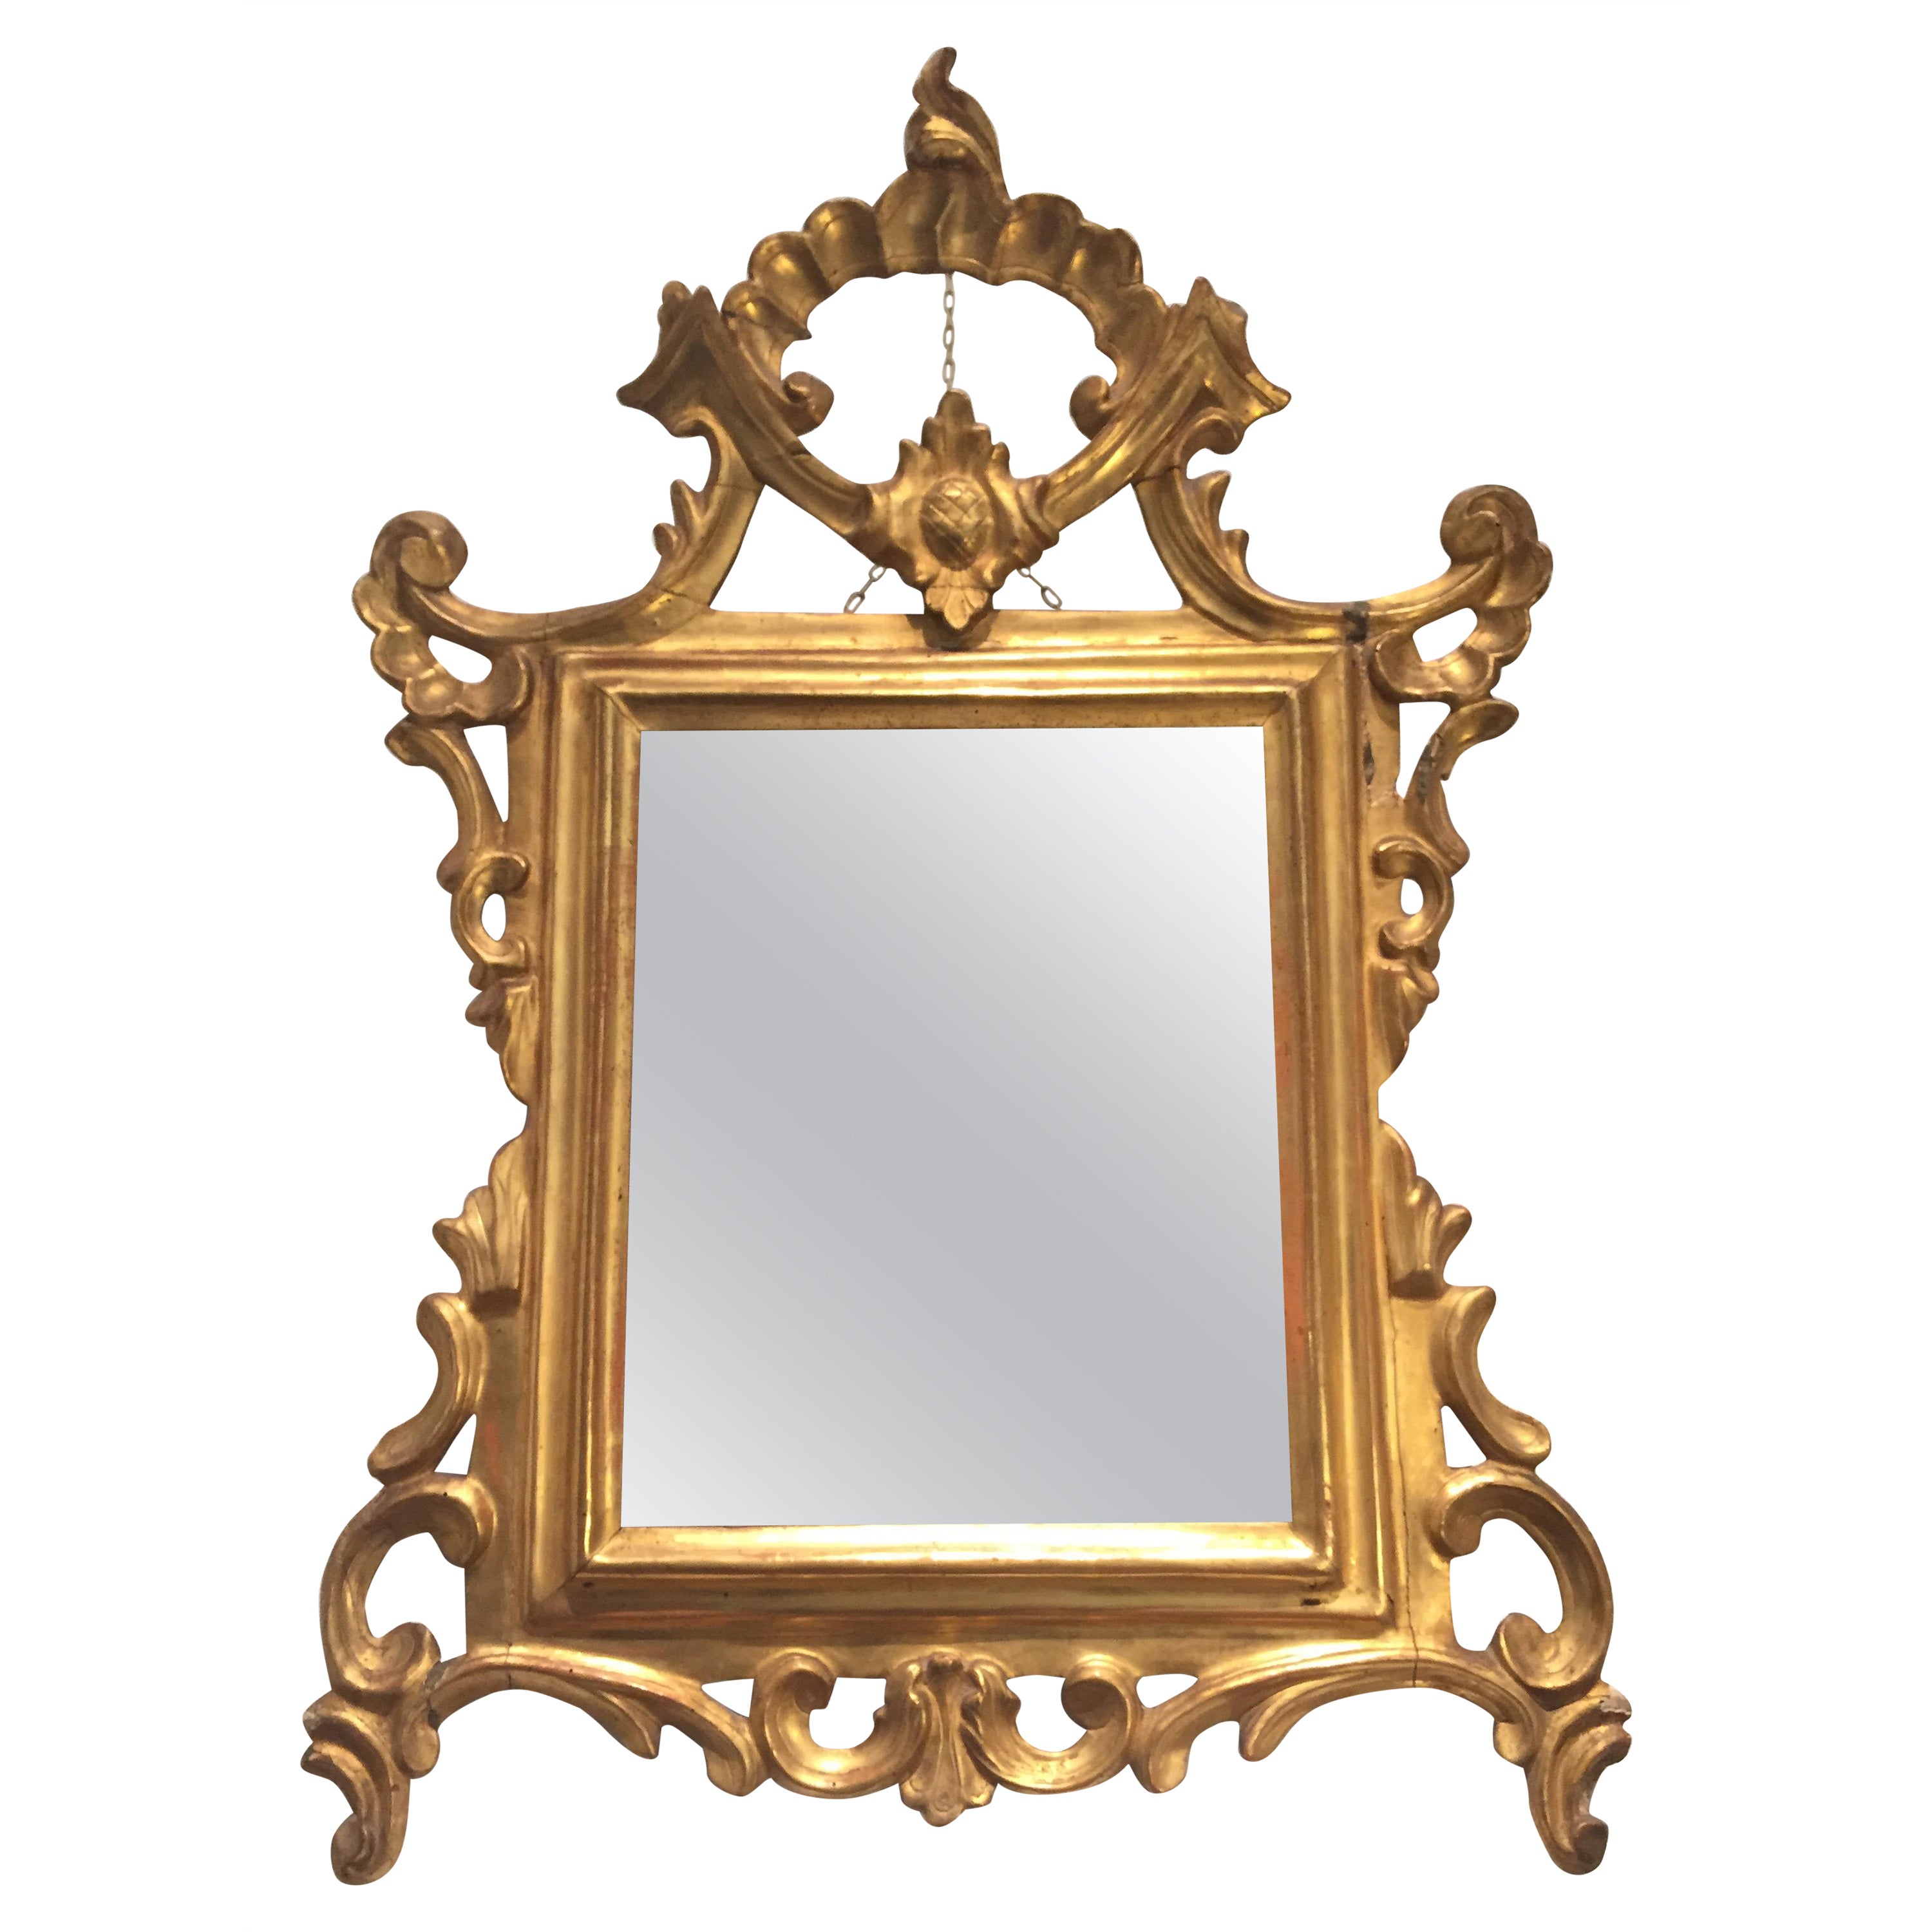 An Italian Louis XV carved and gilt wood mirror dating back to the mid-18th century. Of Italian origin, this antique mirror is realized in Cembran pinewood and comes from the furnishing of a private collection in Milan. 

Original gilding and